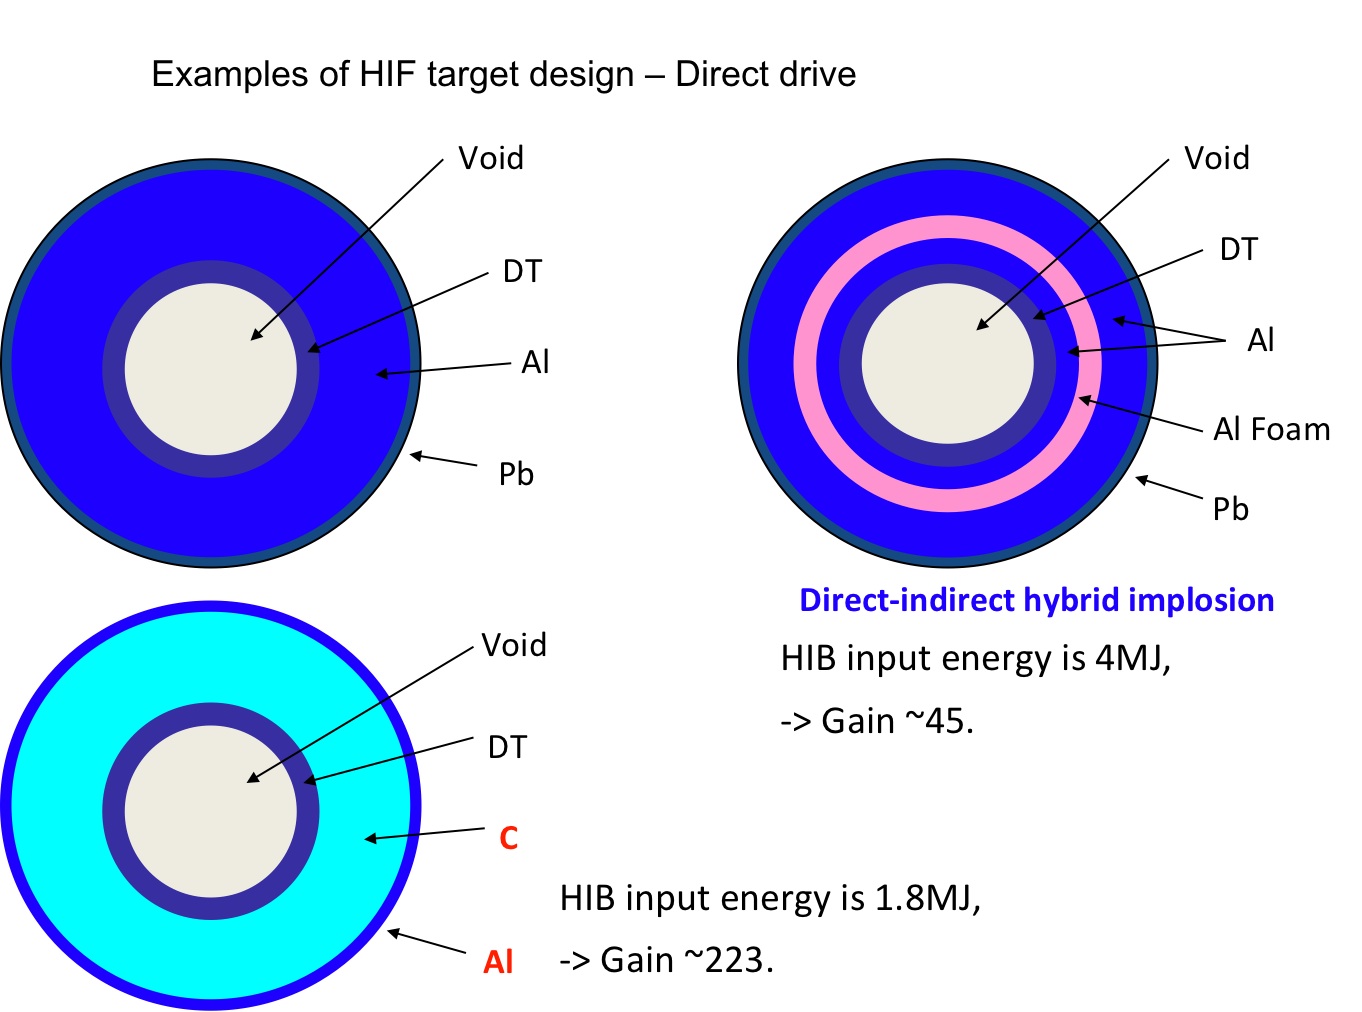 example direct drive target